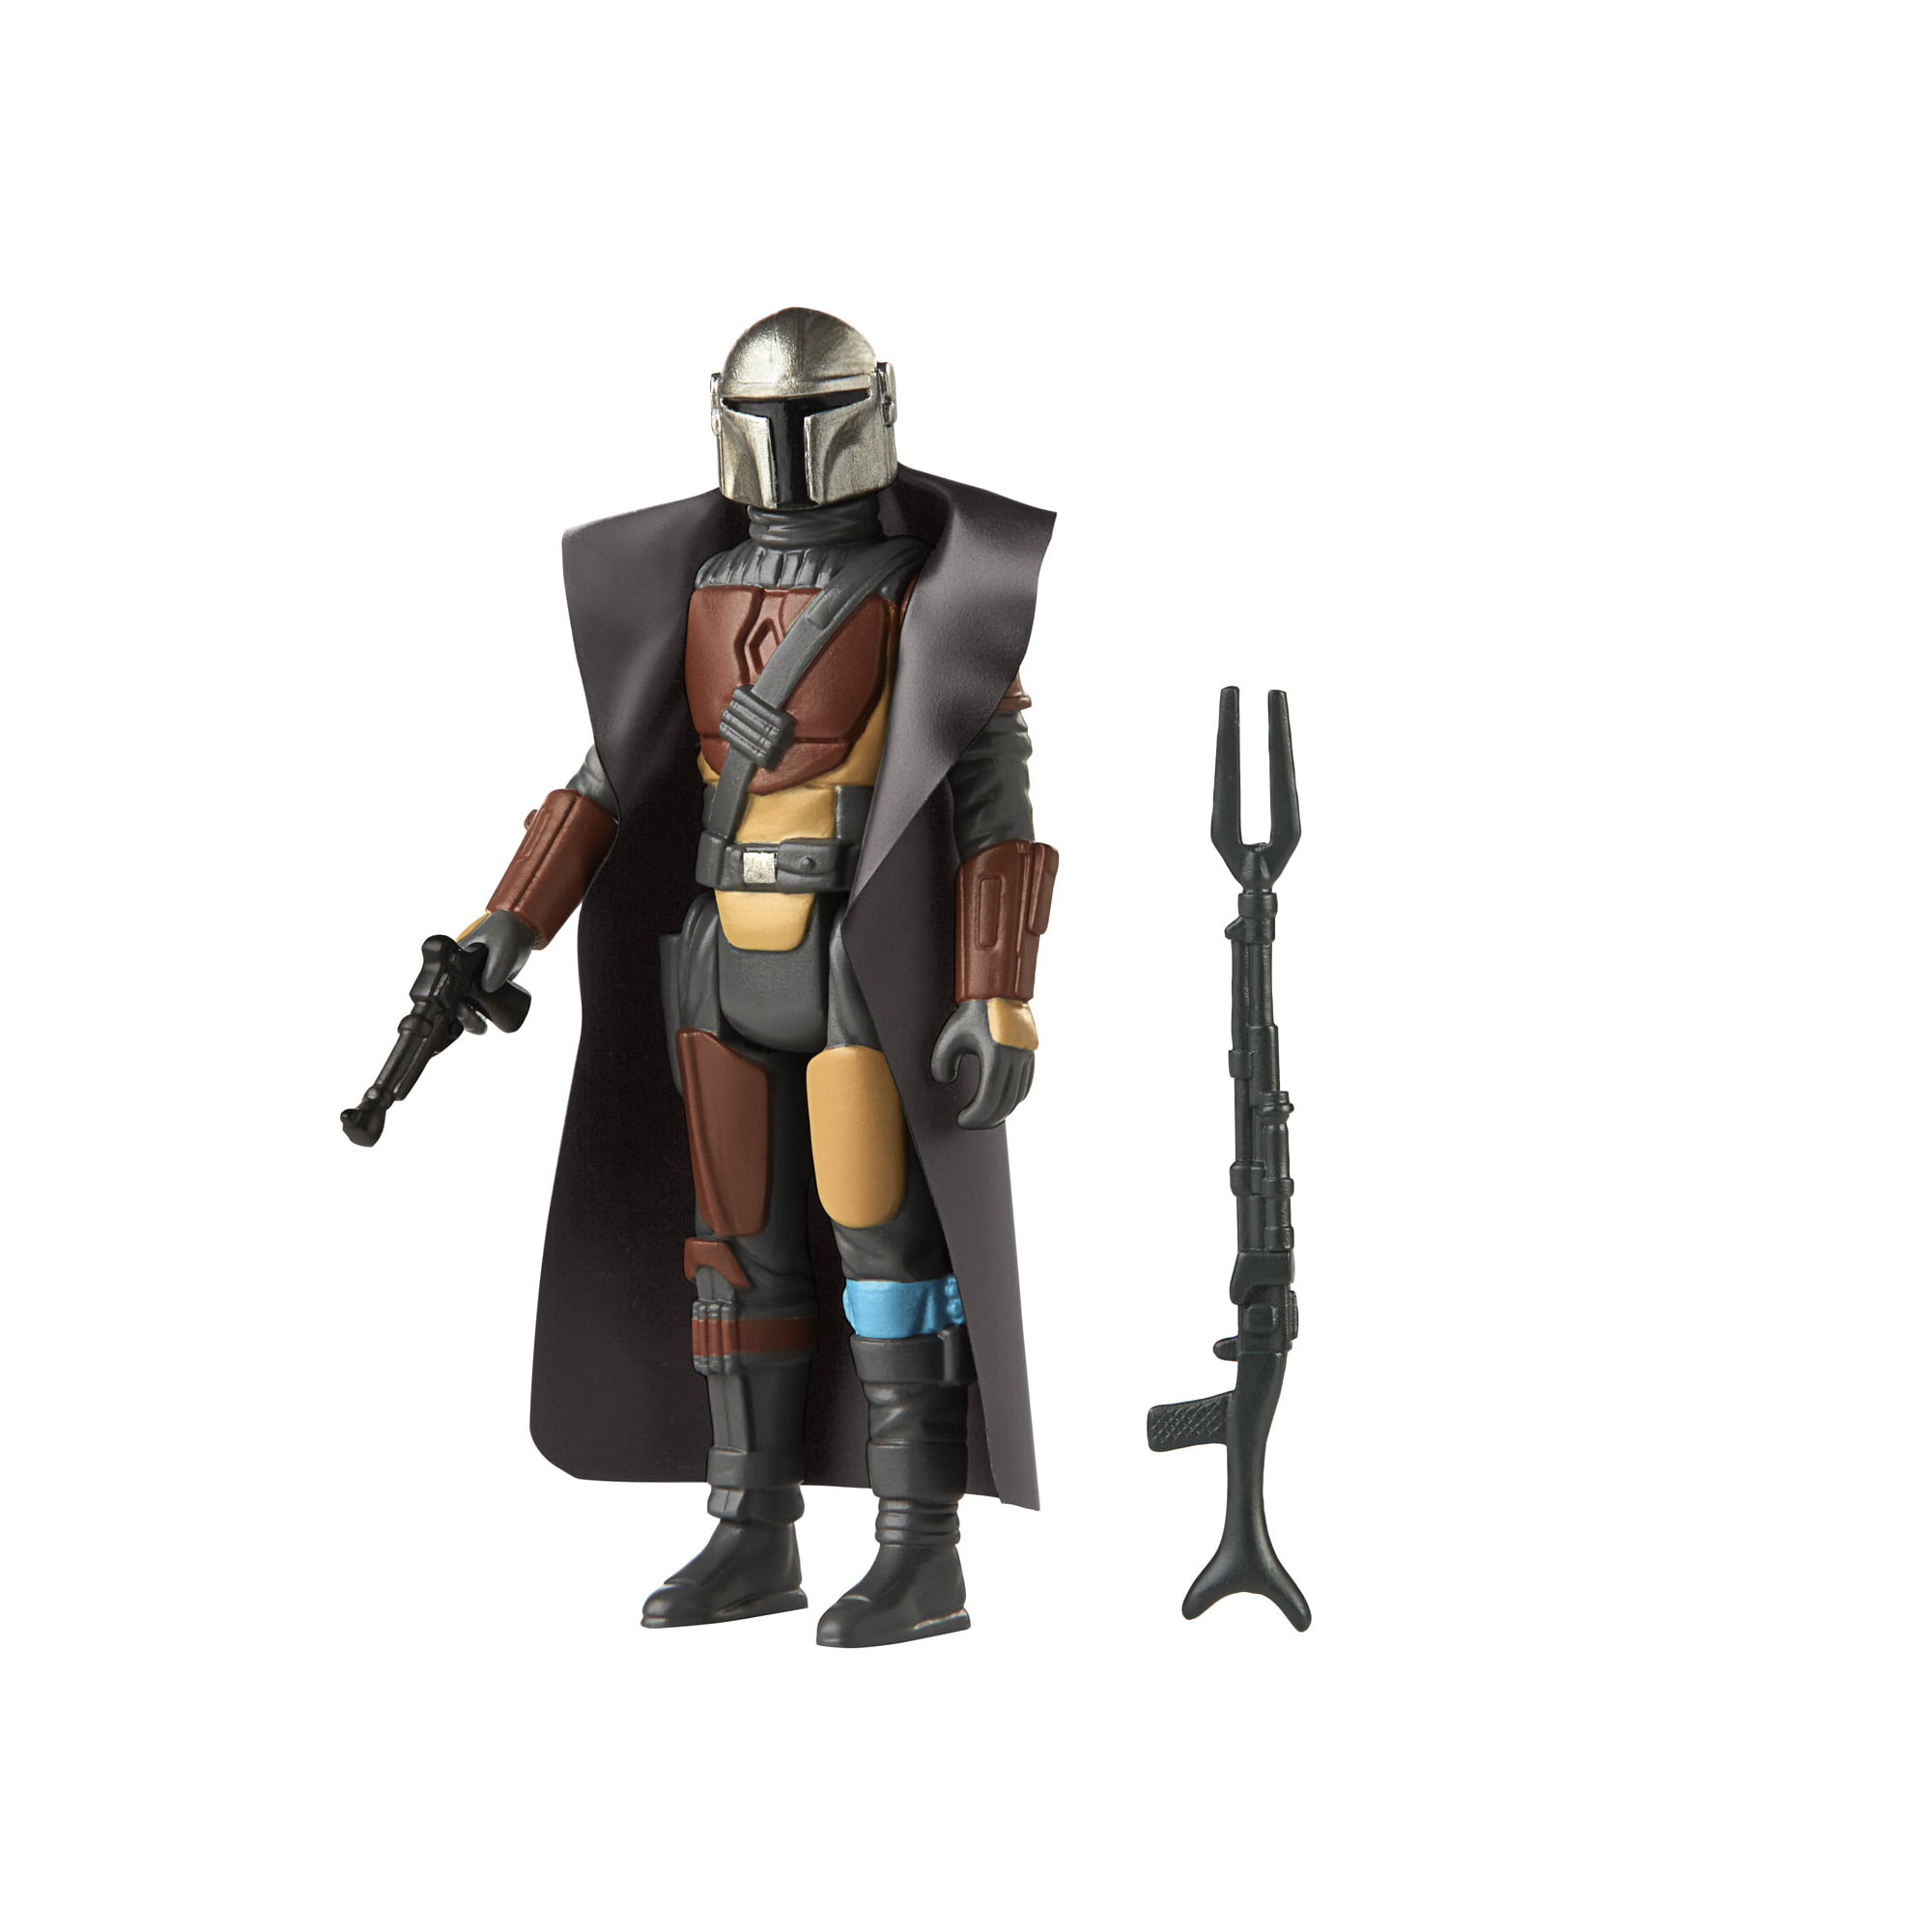 Toys for Kids Ages 4 and Up Star Wars Retro Collection The Mandalorian Toy 3.75-Inch-Scale Collectible Action Figure with Accessories 